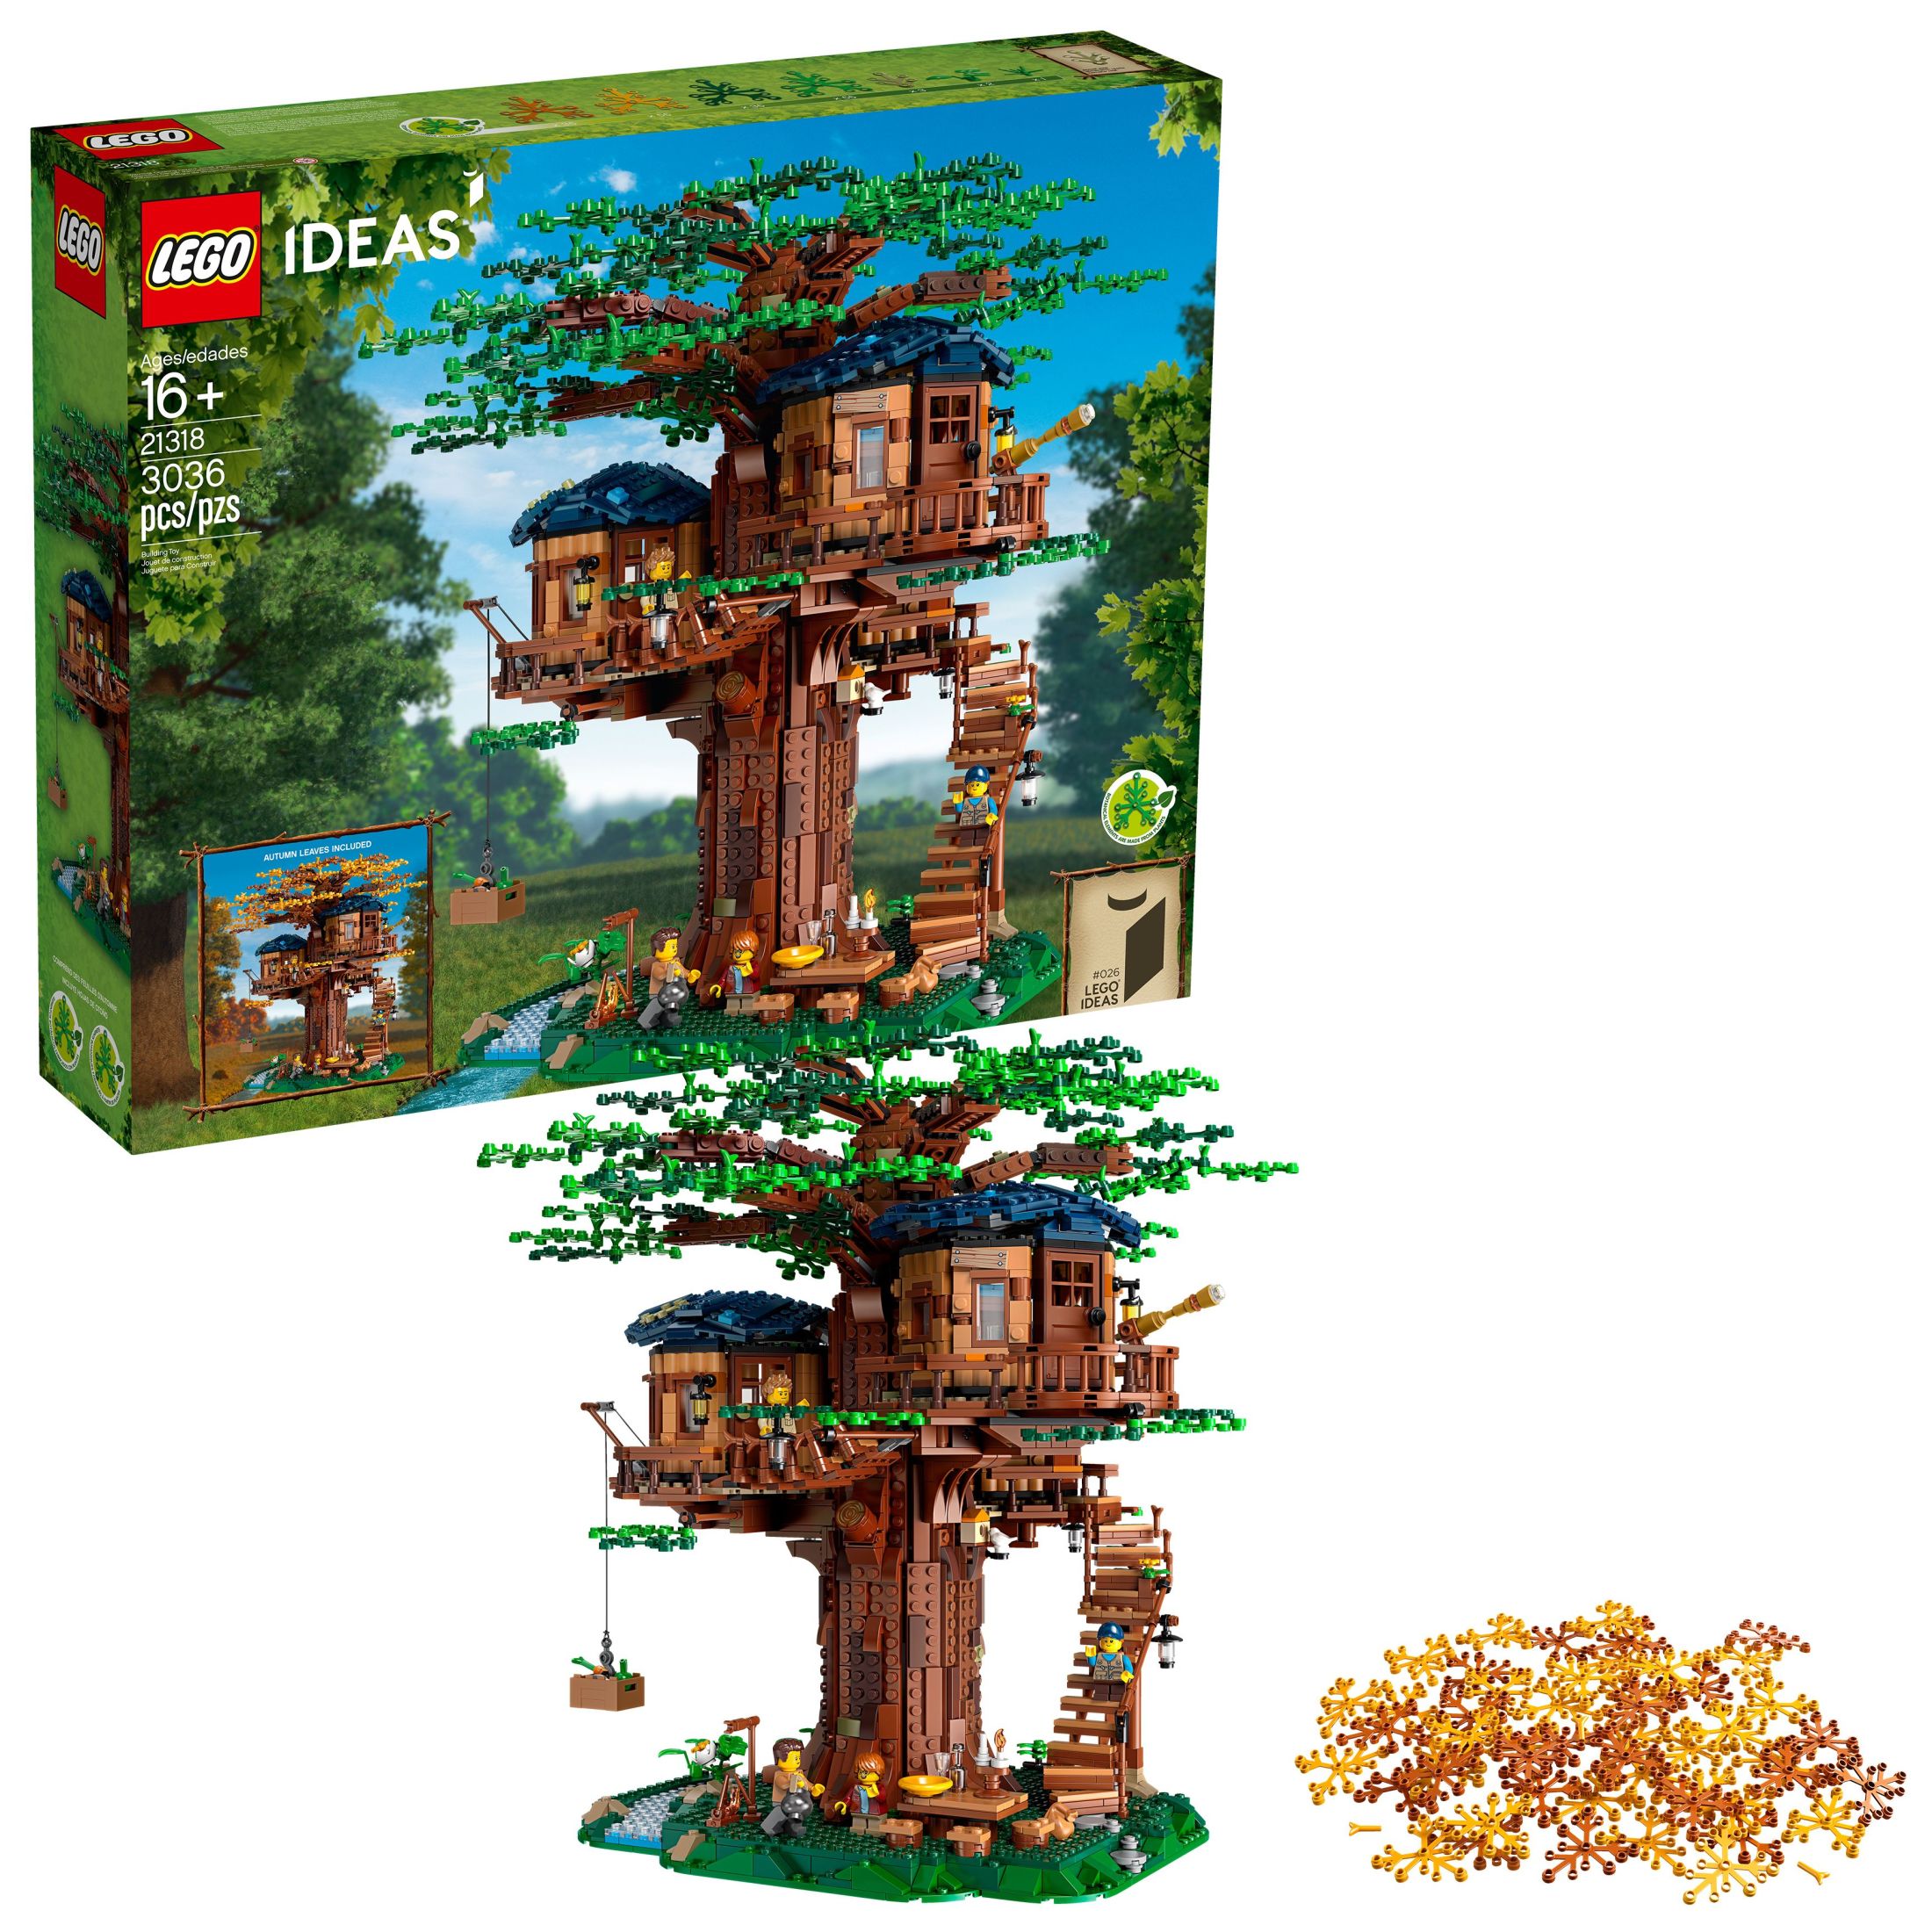 LEGO Ideas Tree House 21318, Model Construction Set for 16 Plus Year Olds with 3 Cabins, Interchangeable Leaves, Minifigures and a Bird Figure - image 1 of 9